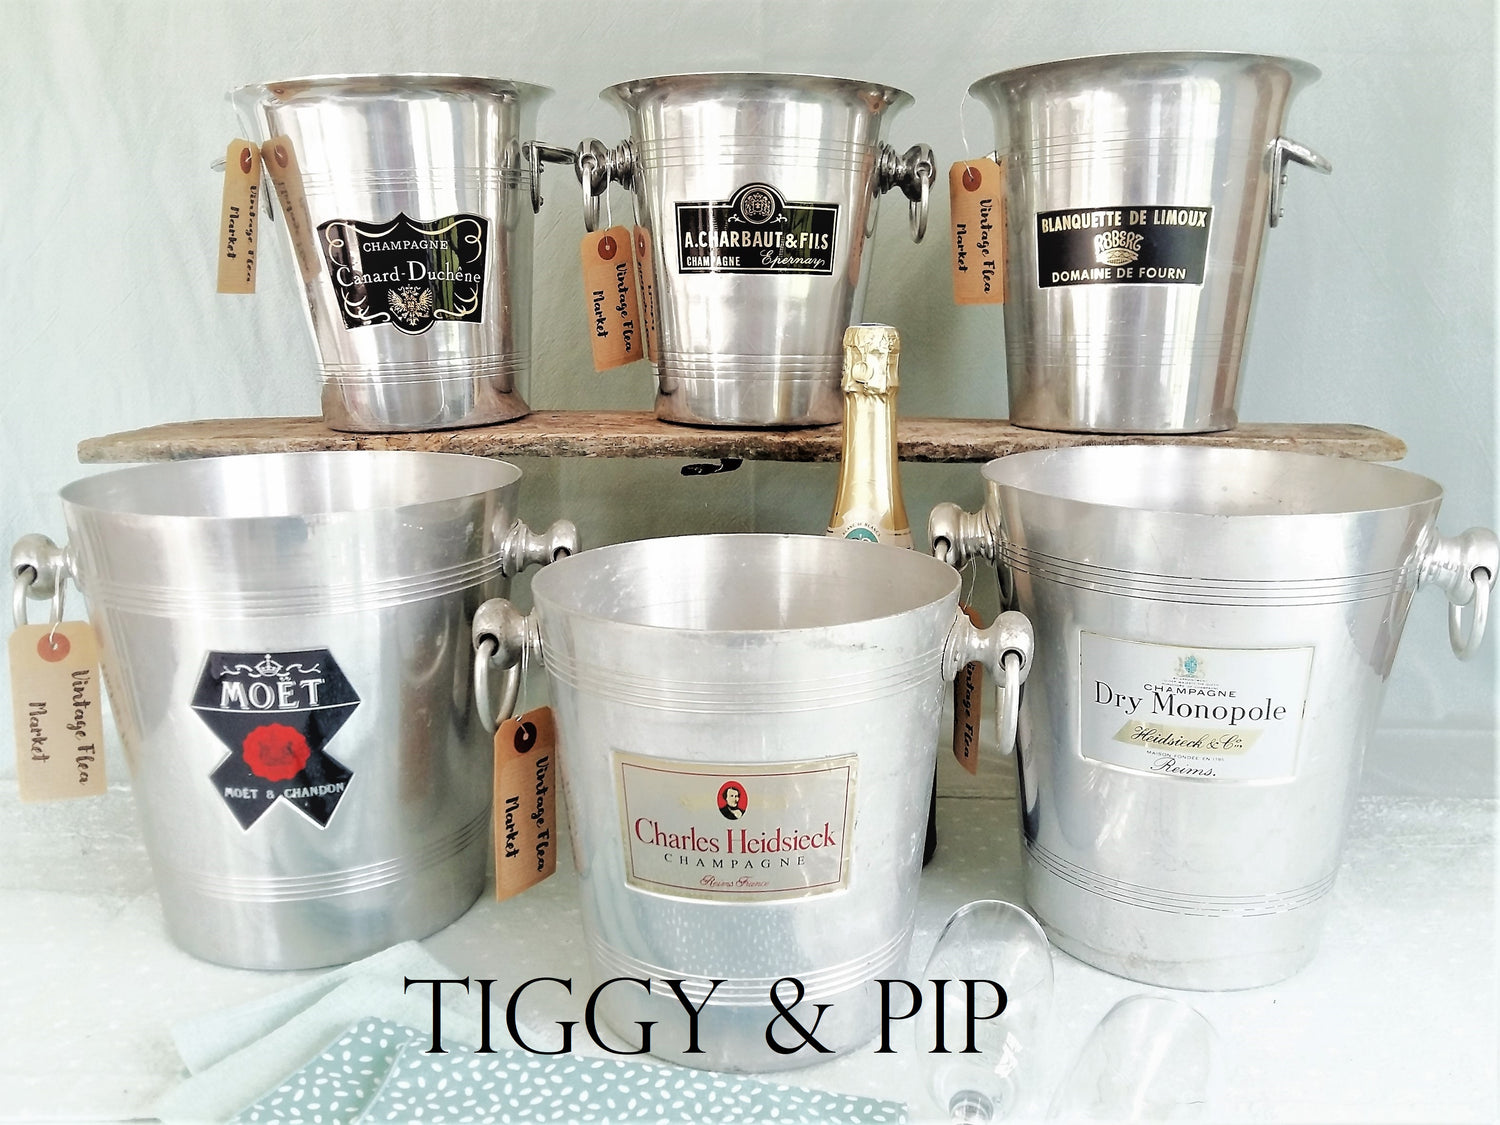 Collection of Champagne Ice Buckets by Tiggy and Pip